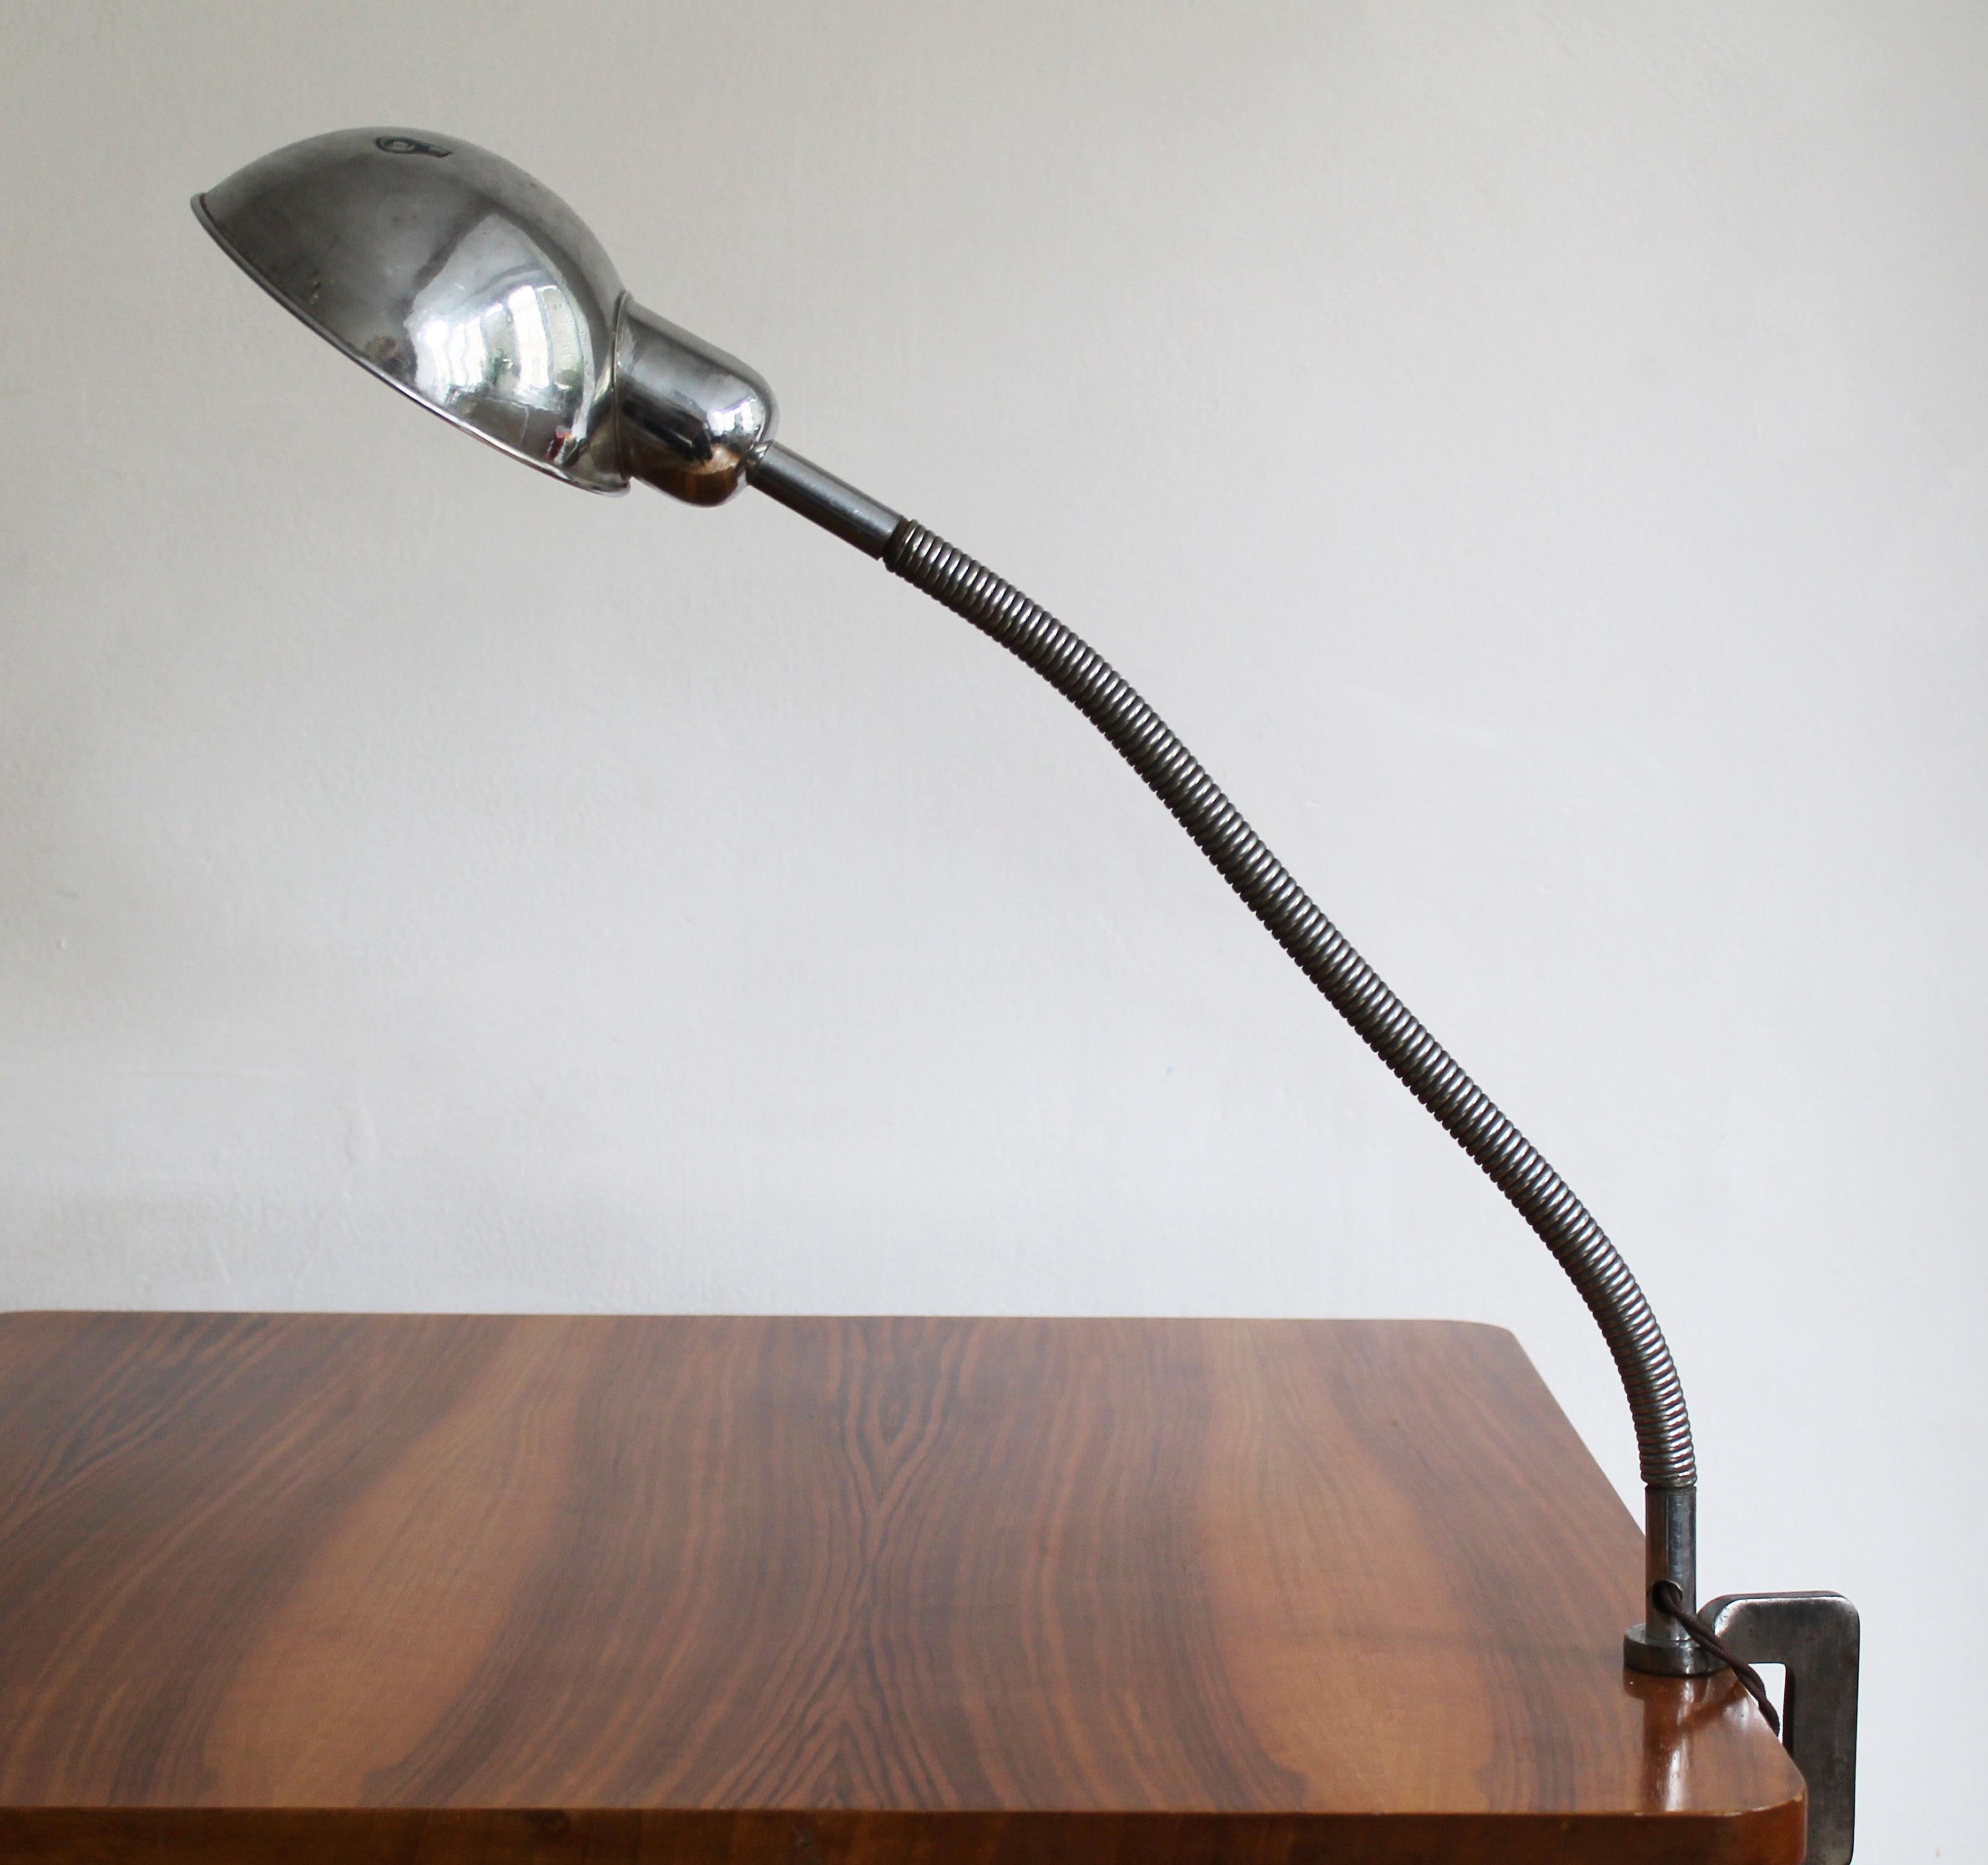 This is an original 1930’s office/workshop desk lamp. Due to its design, it is often nicknamed the “gooseneck”. This piece can be fixed directly to the desk (of varying thicknesses) and the lampshade can be adjusted up or down and also to the sides.